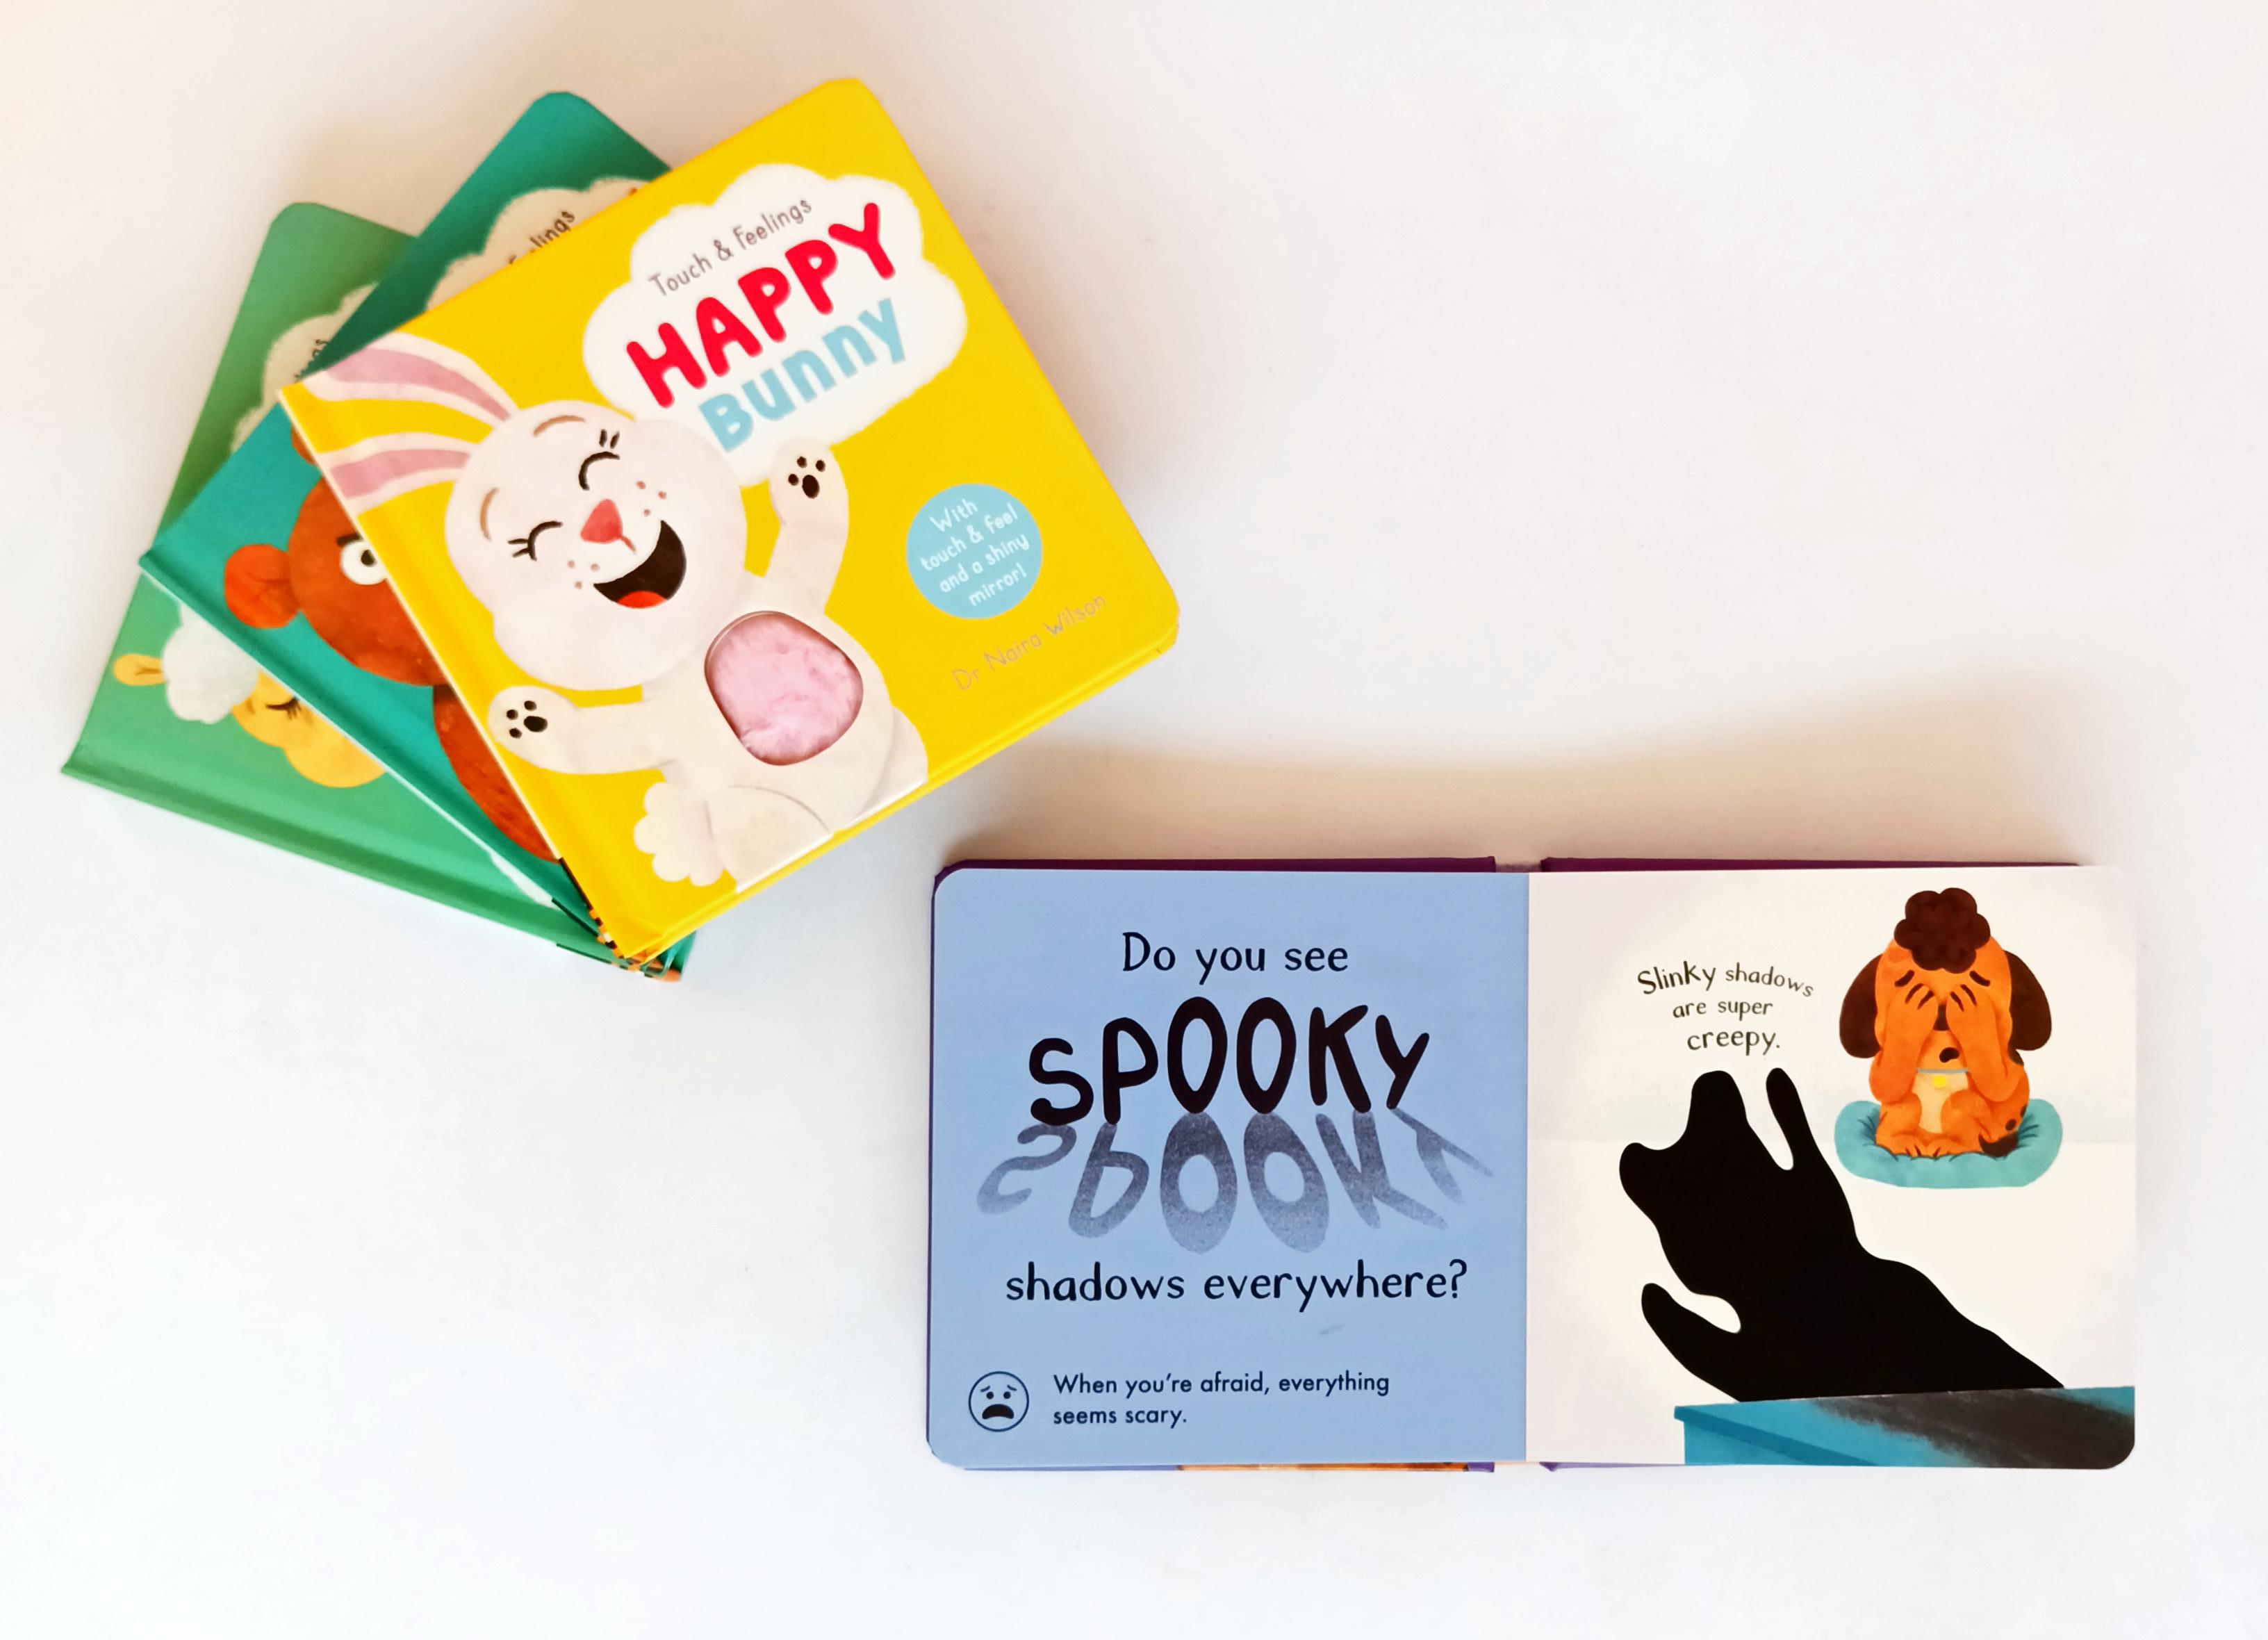 My First Behaviours: Touch & Feelings 4 Book Gift Box Set